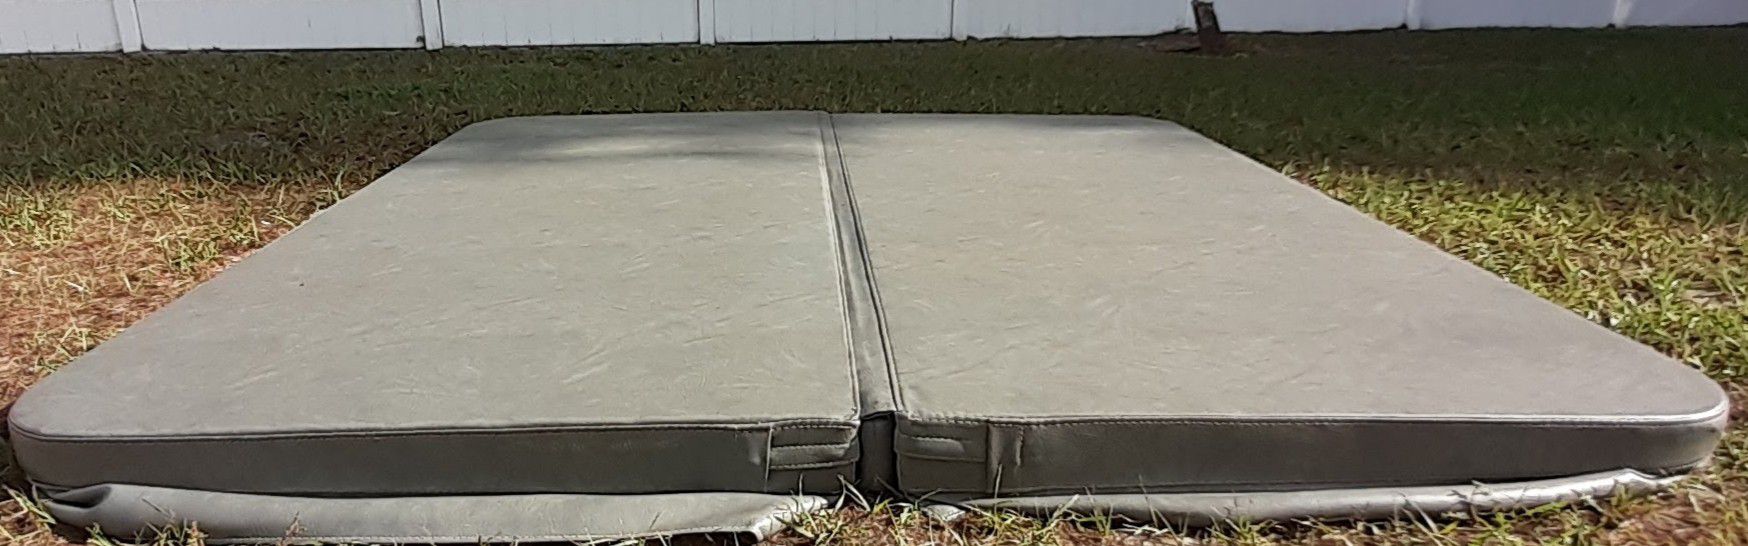 Insulated Hot Tub Cover